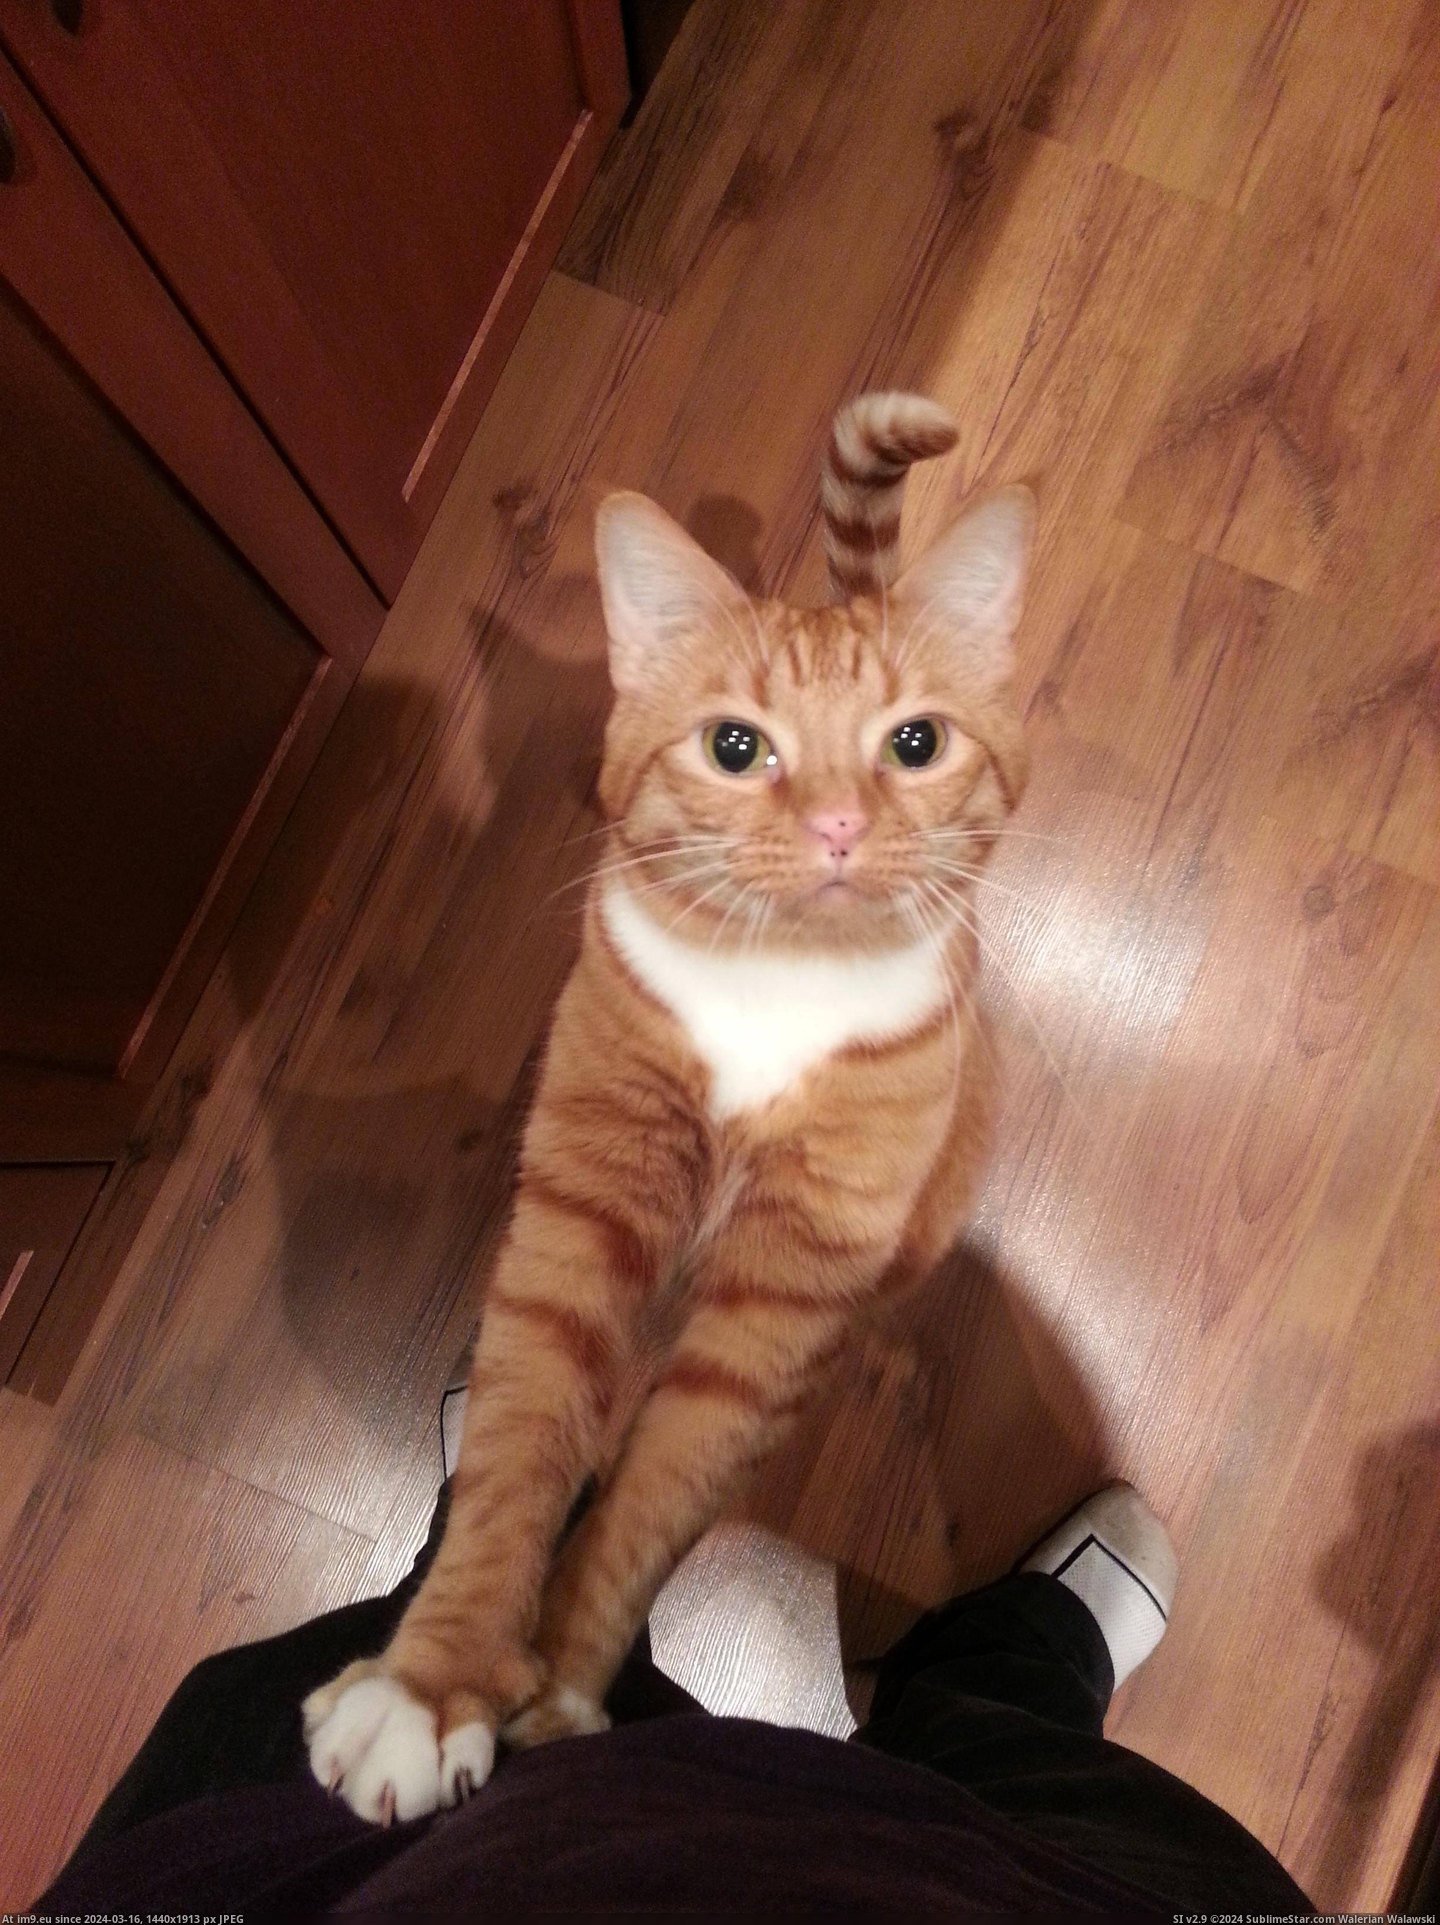 #Cats #Food #Kitchen #For [Cats] He does this whenever I go into the kitchen. 'Food for me?' Pic. (Изображение из альбом My r/CATS favs))